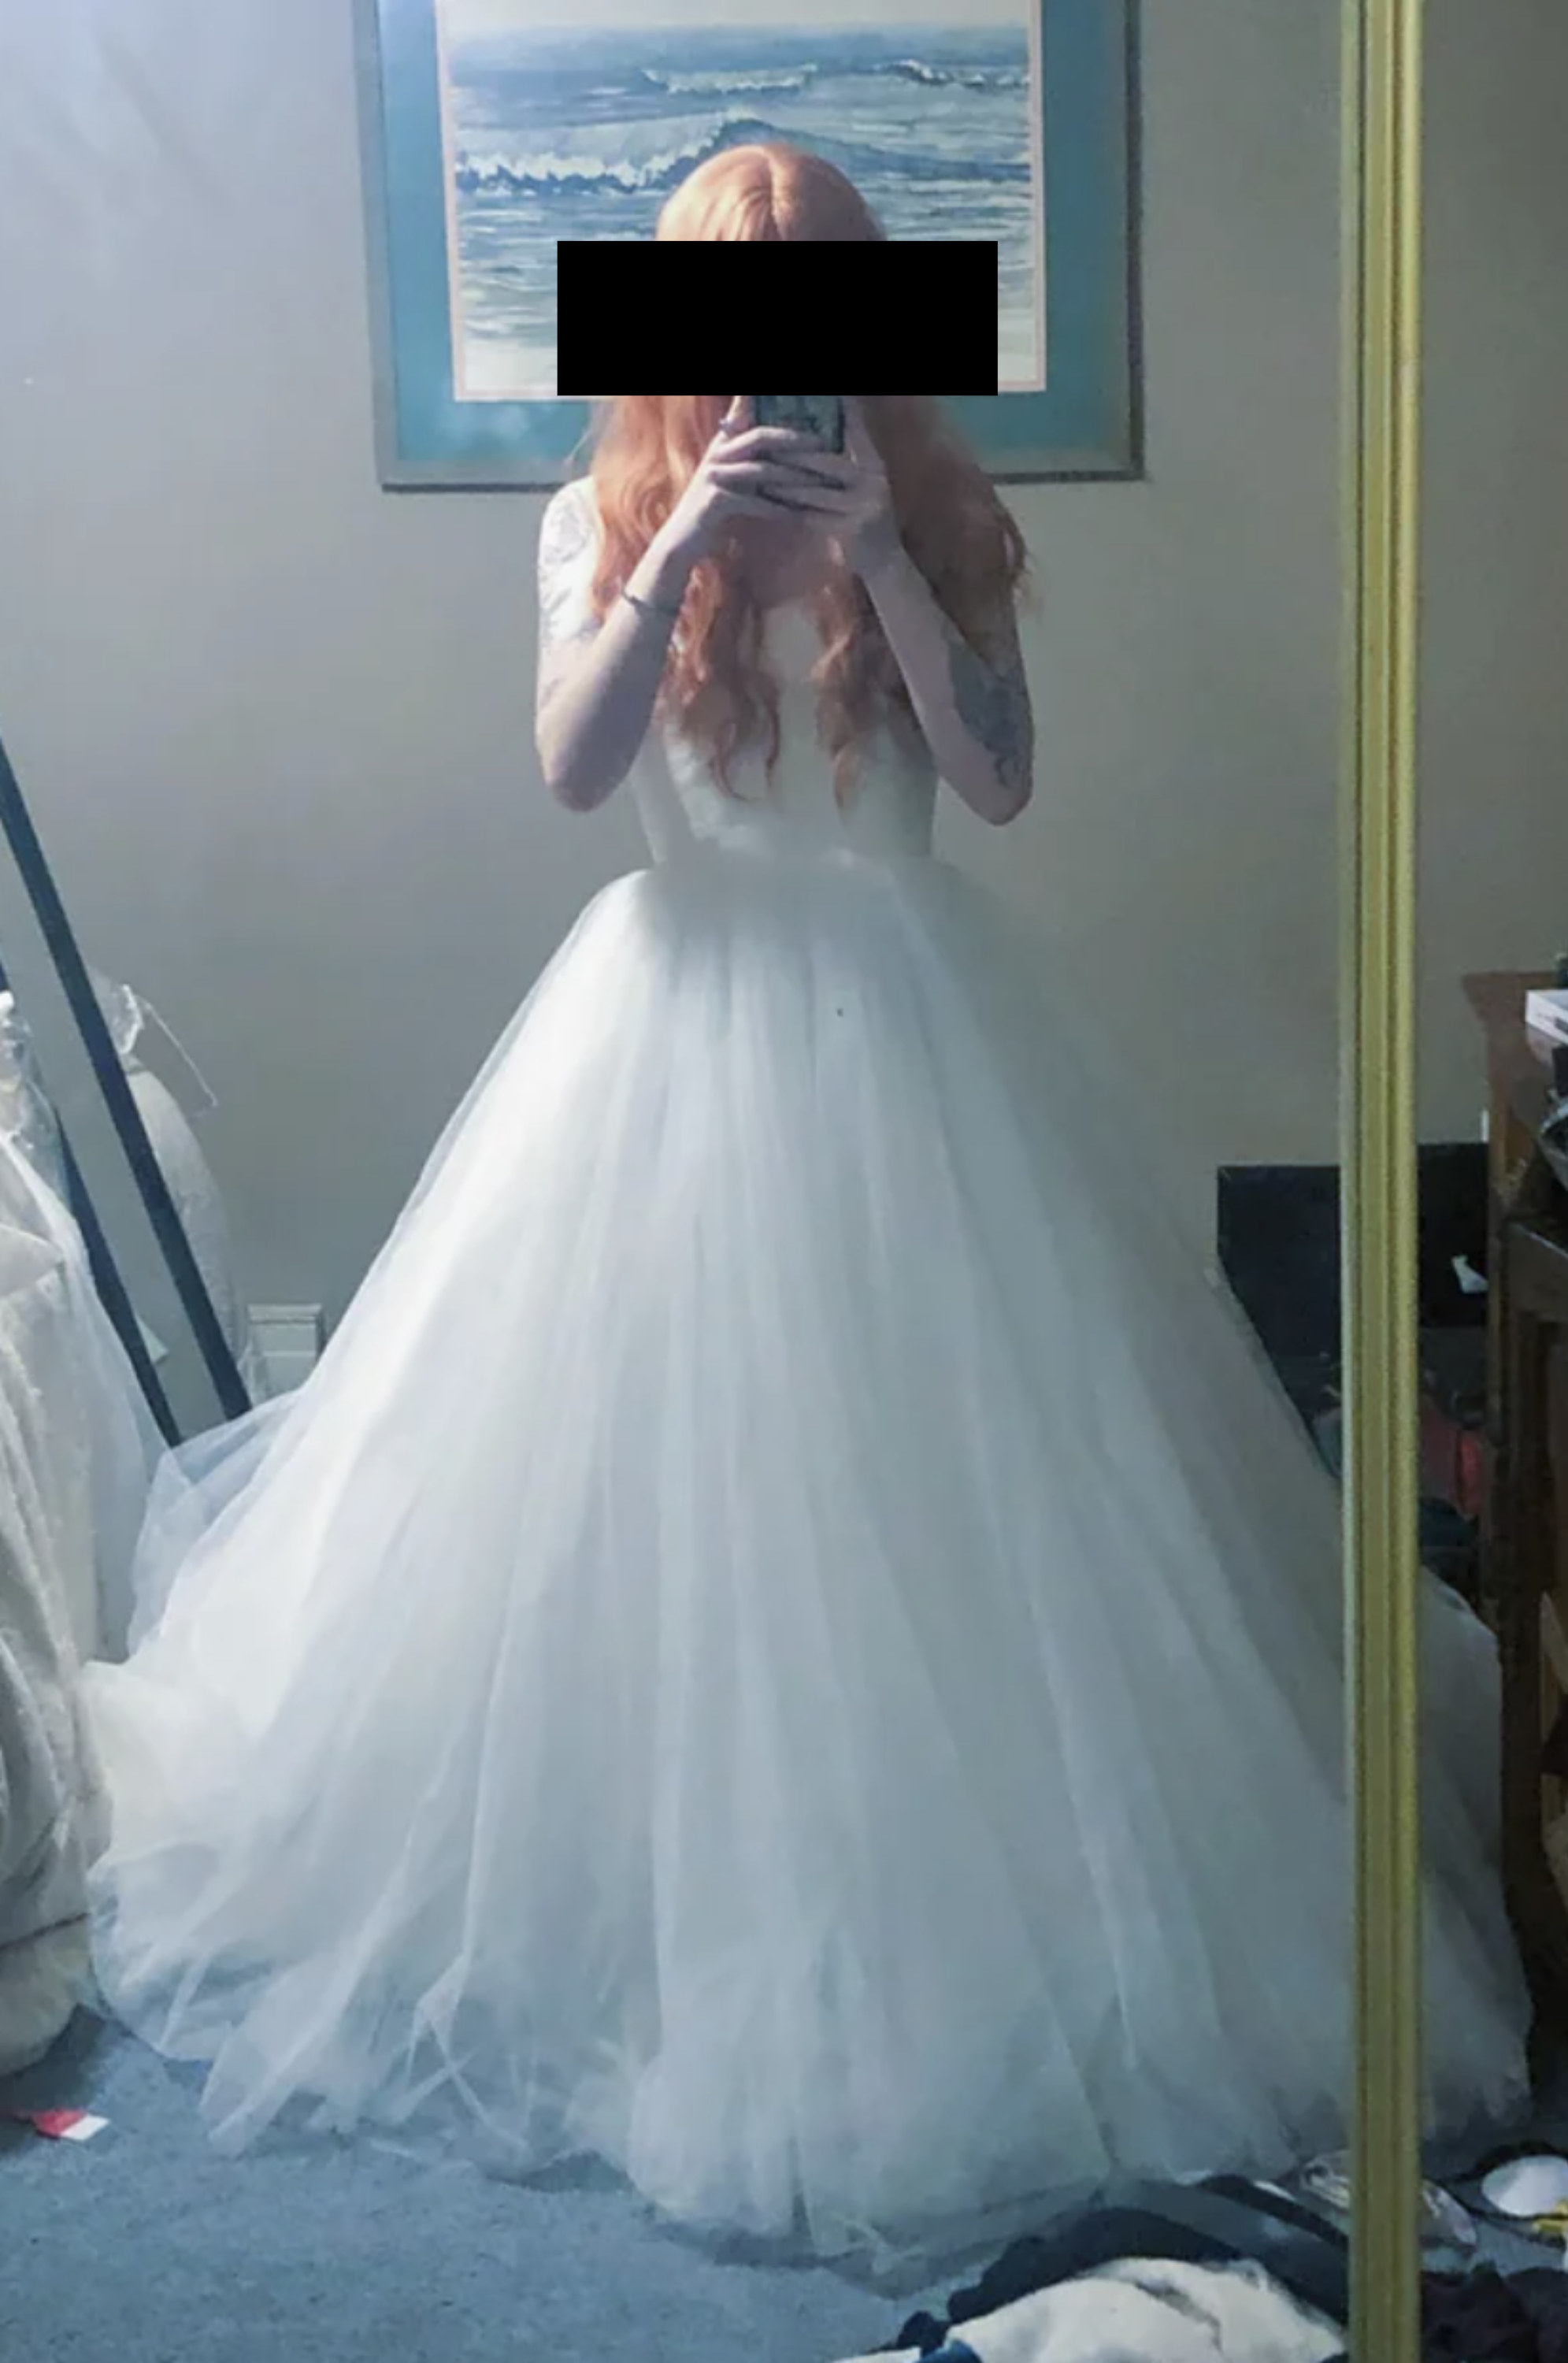 A woman trying on a wedding dress